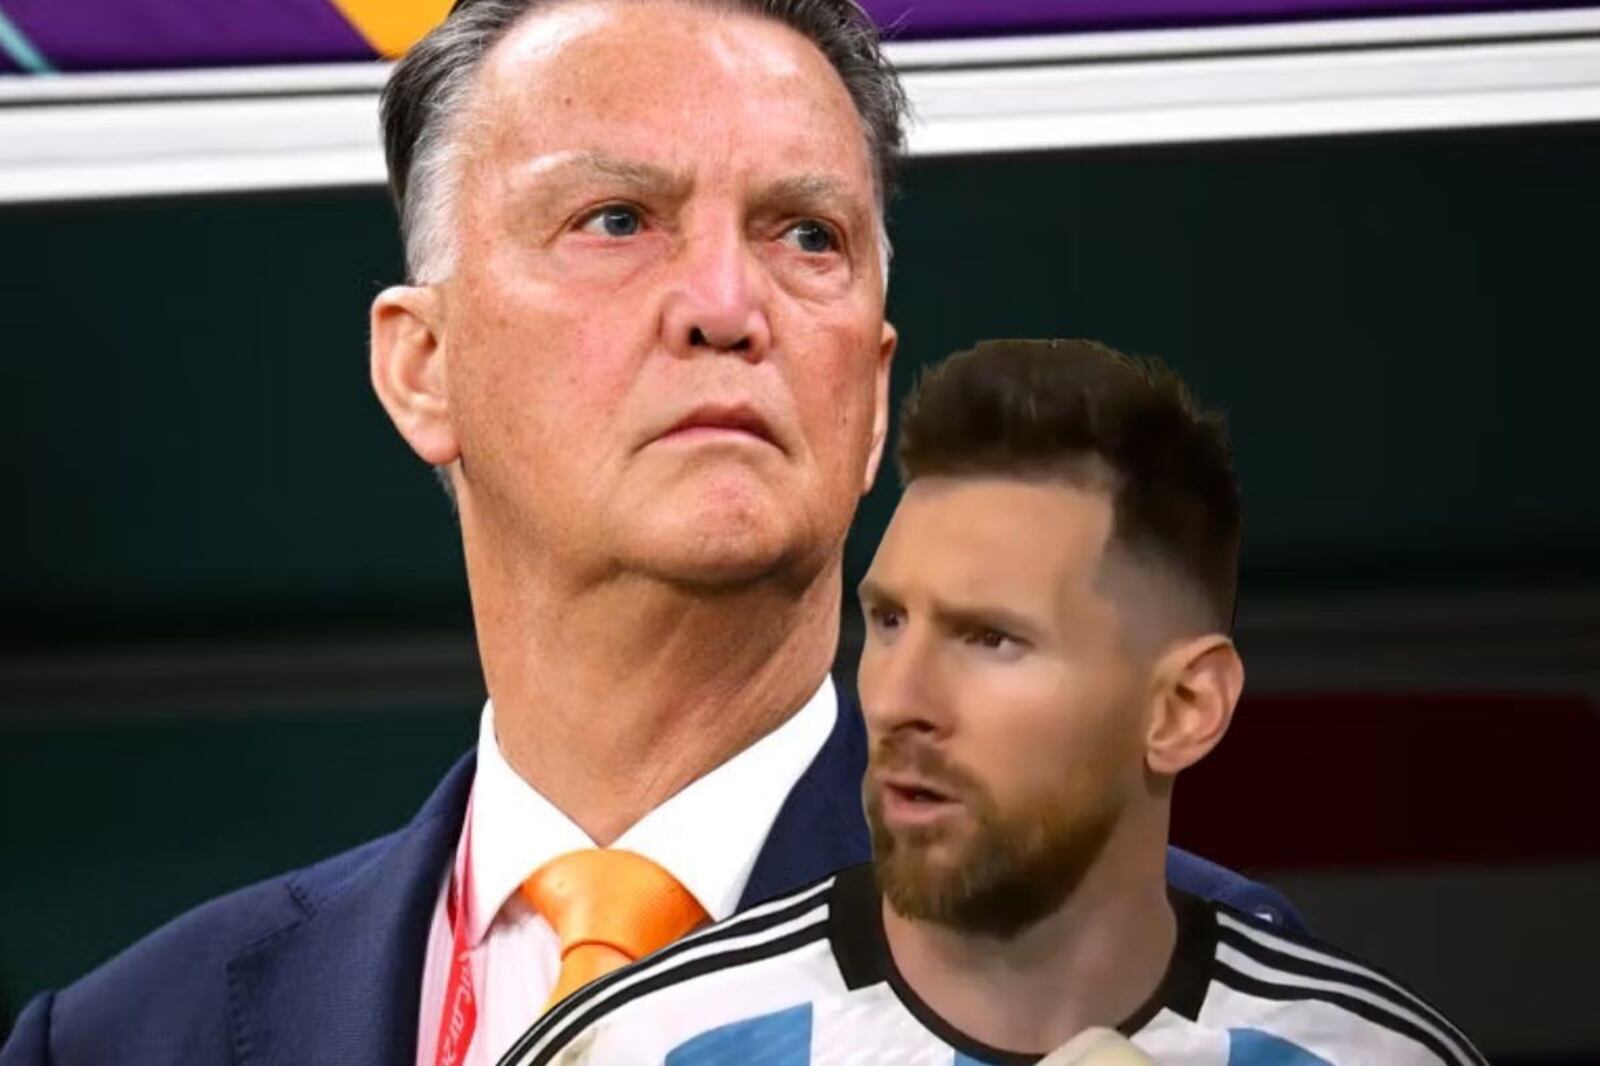 (VIDEO) Van Gaal insinuates that FIFA gifted the World Cup to Messi, here are his words